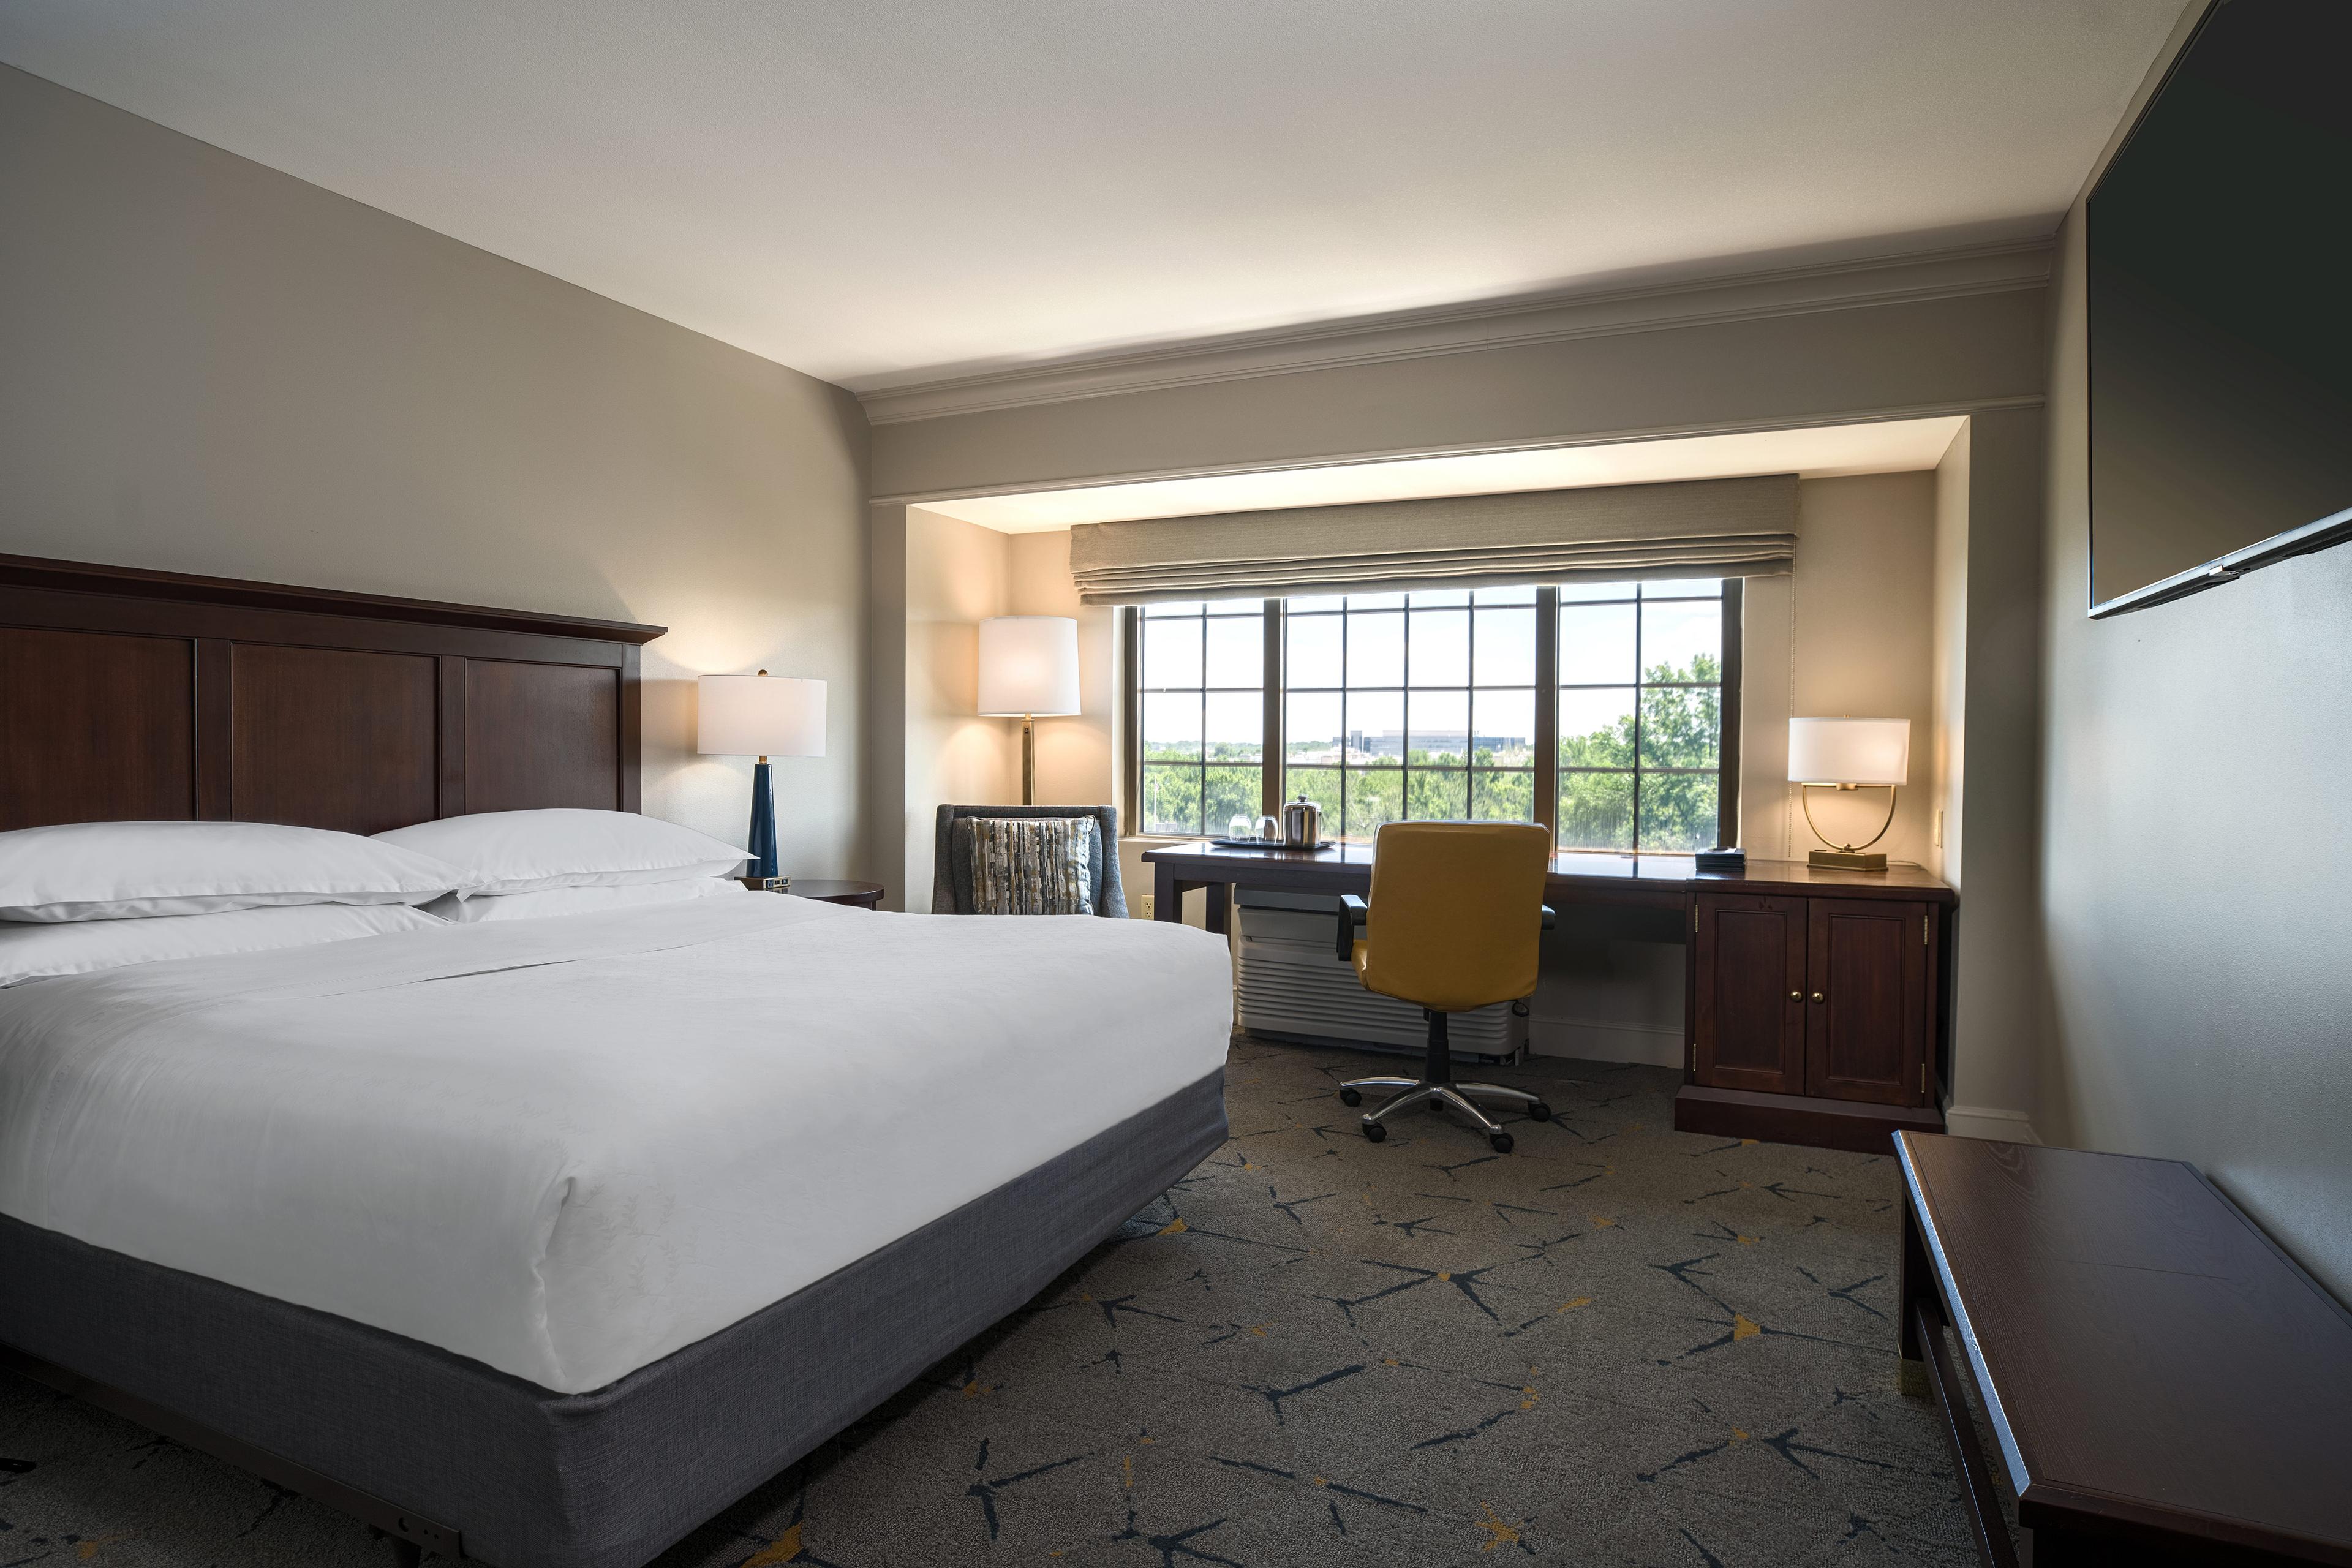 Stay connected with complimentary Wi-Fi and utilize our ample work desk to answer business emails in the comfort of your king guest room.